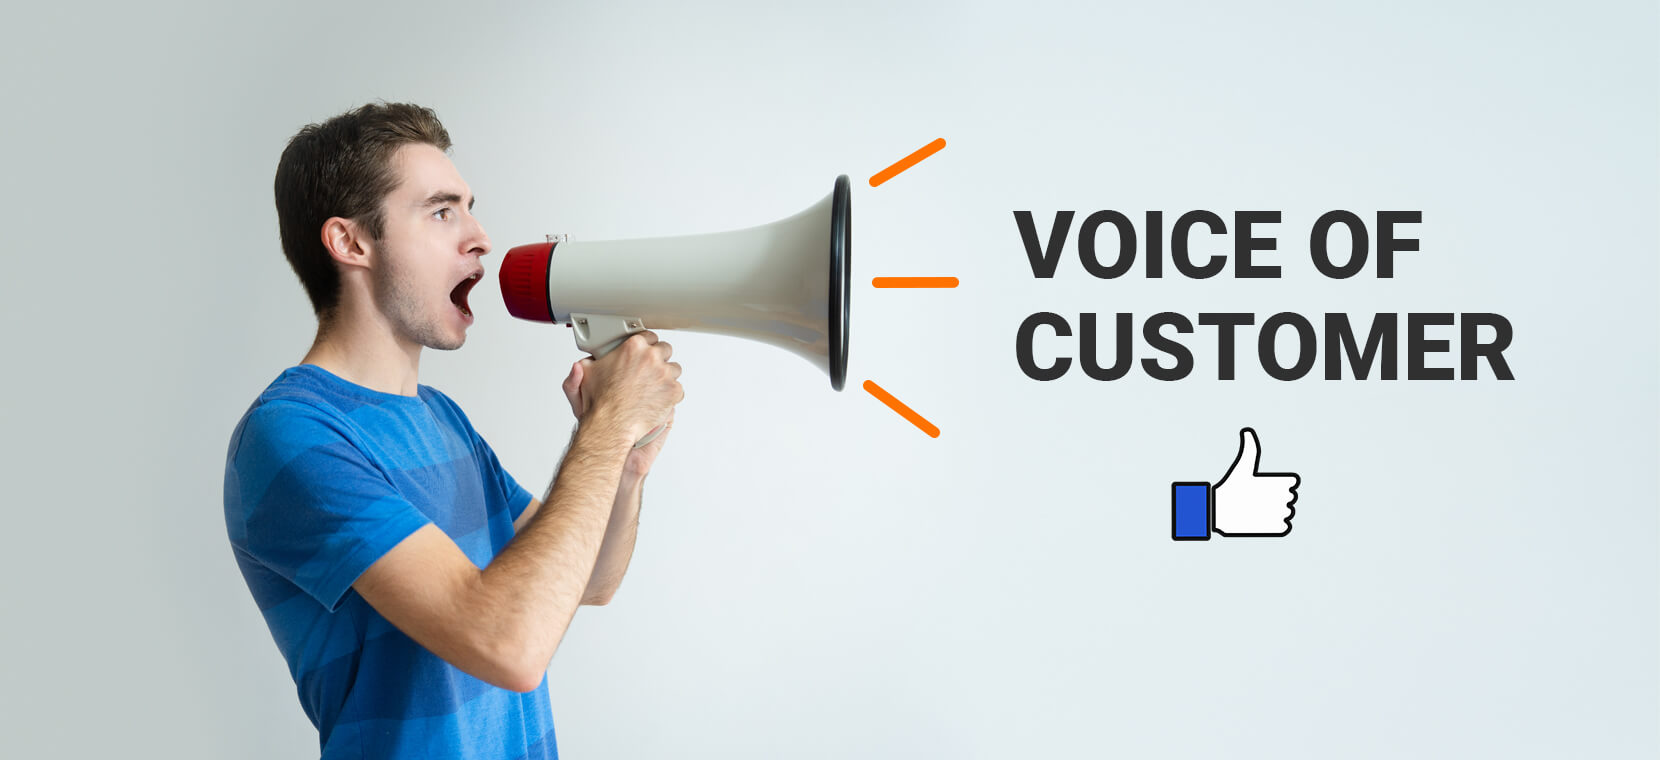 Voice of customer (VOC): What & how businesses must listen